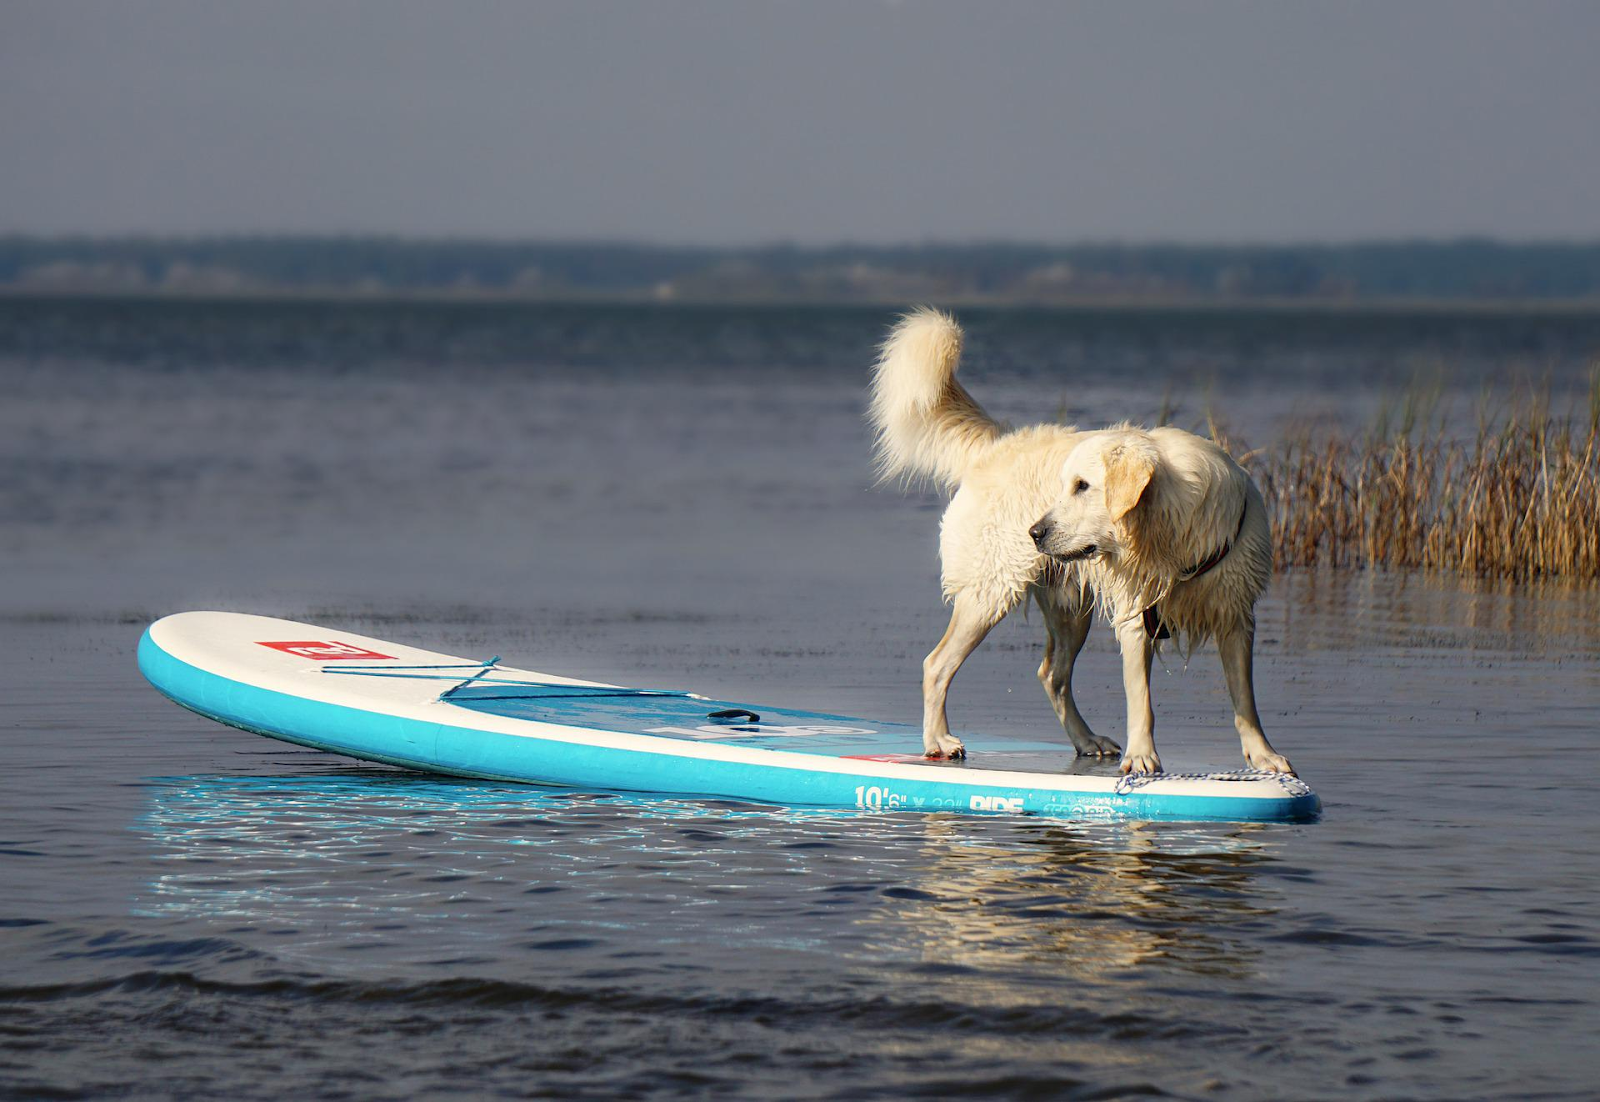 Paddle boards each have their own weight capacities in case you want to bring more storage or even a pet.